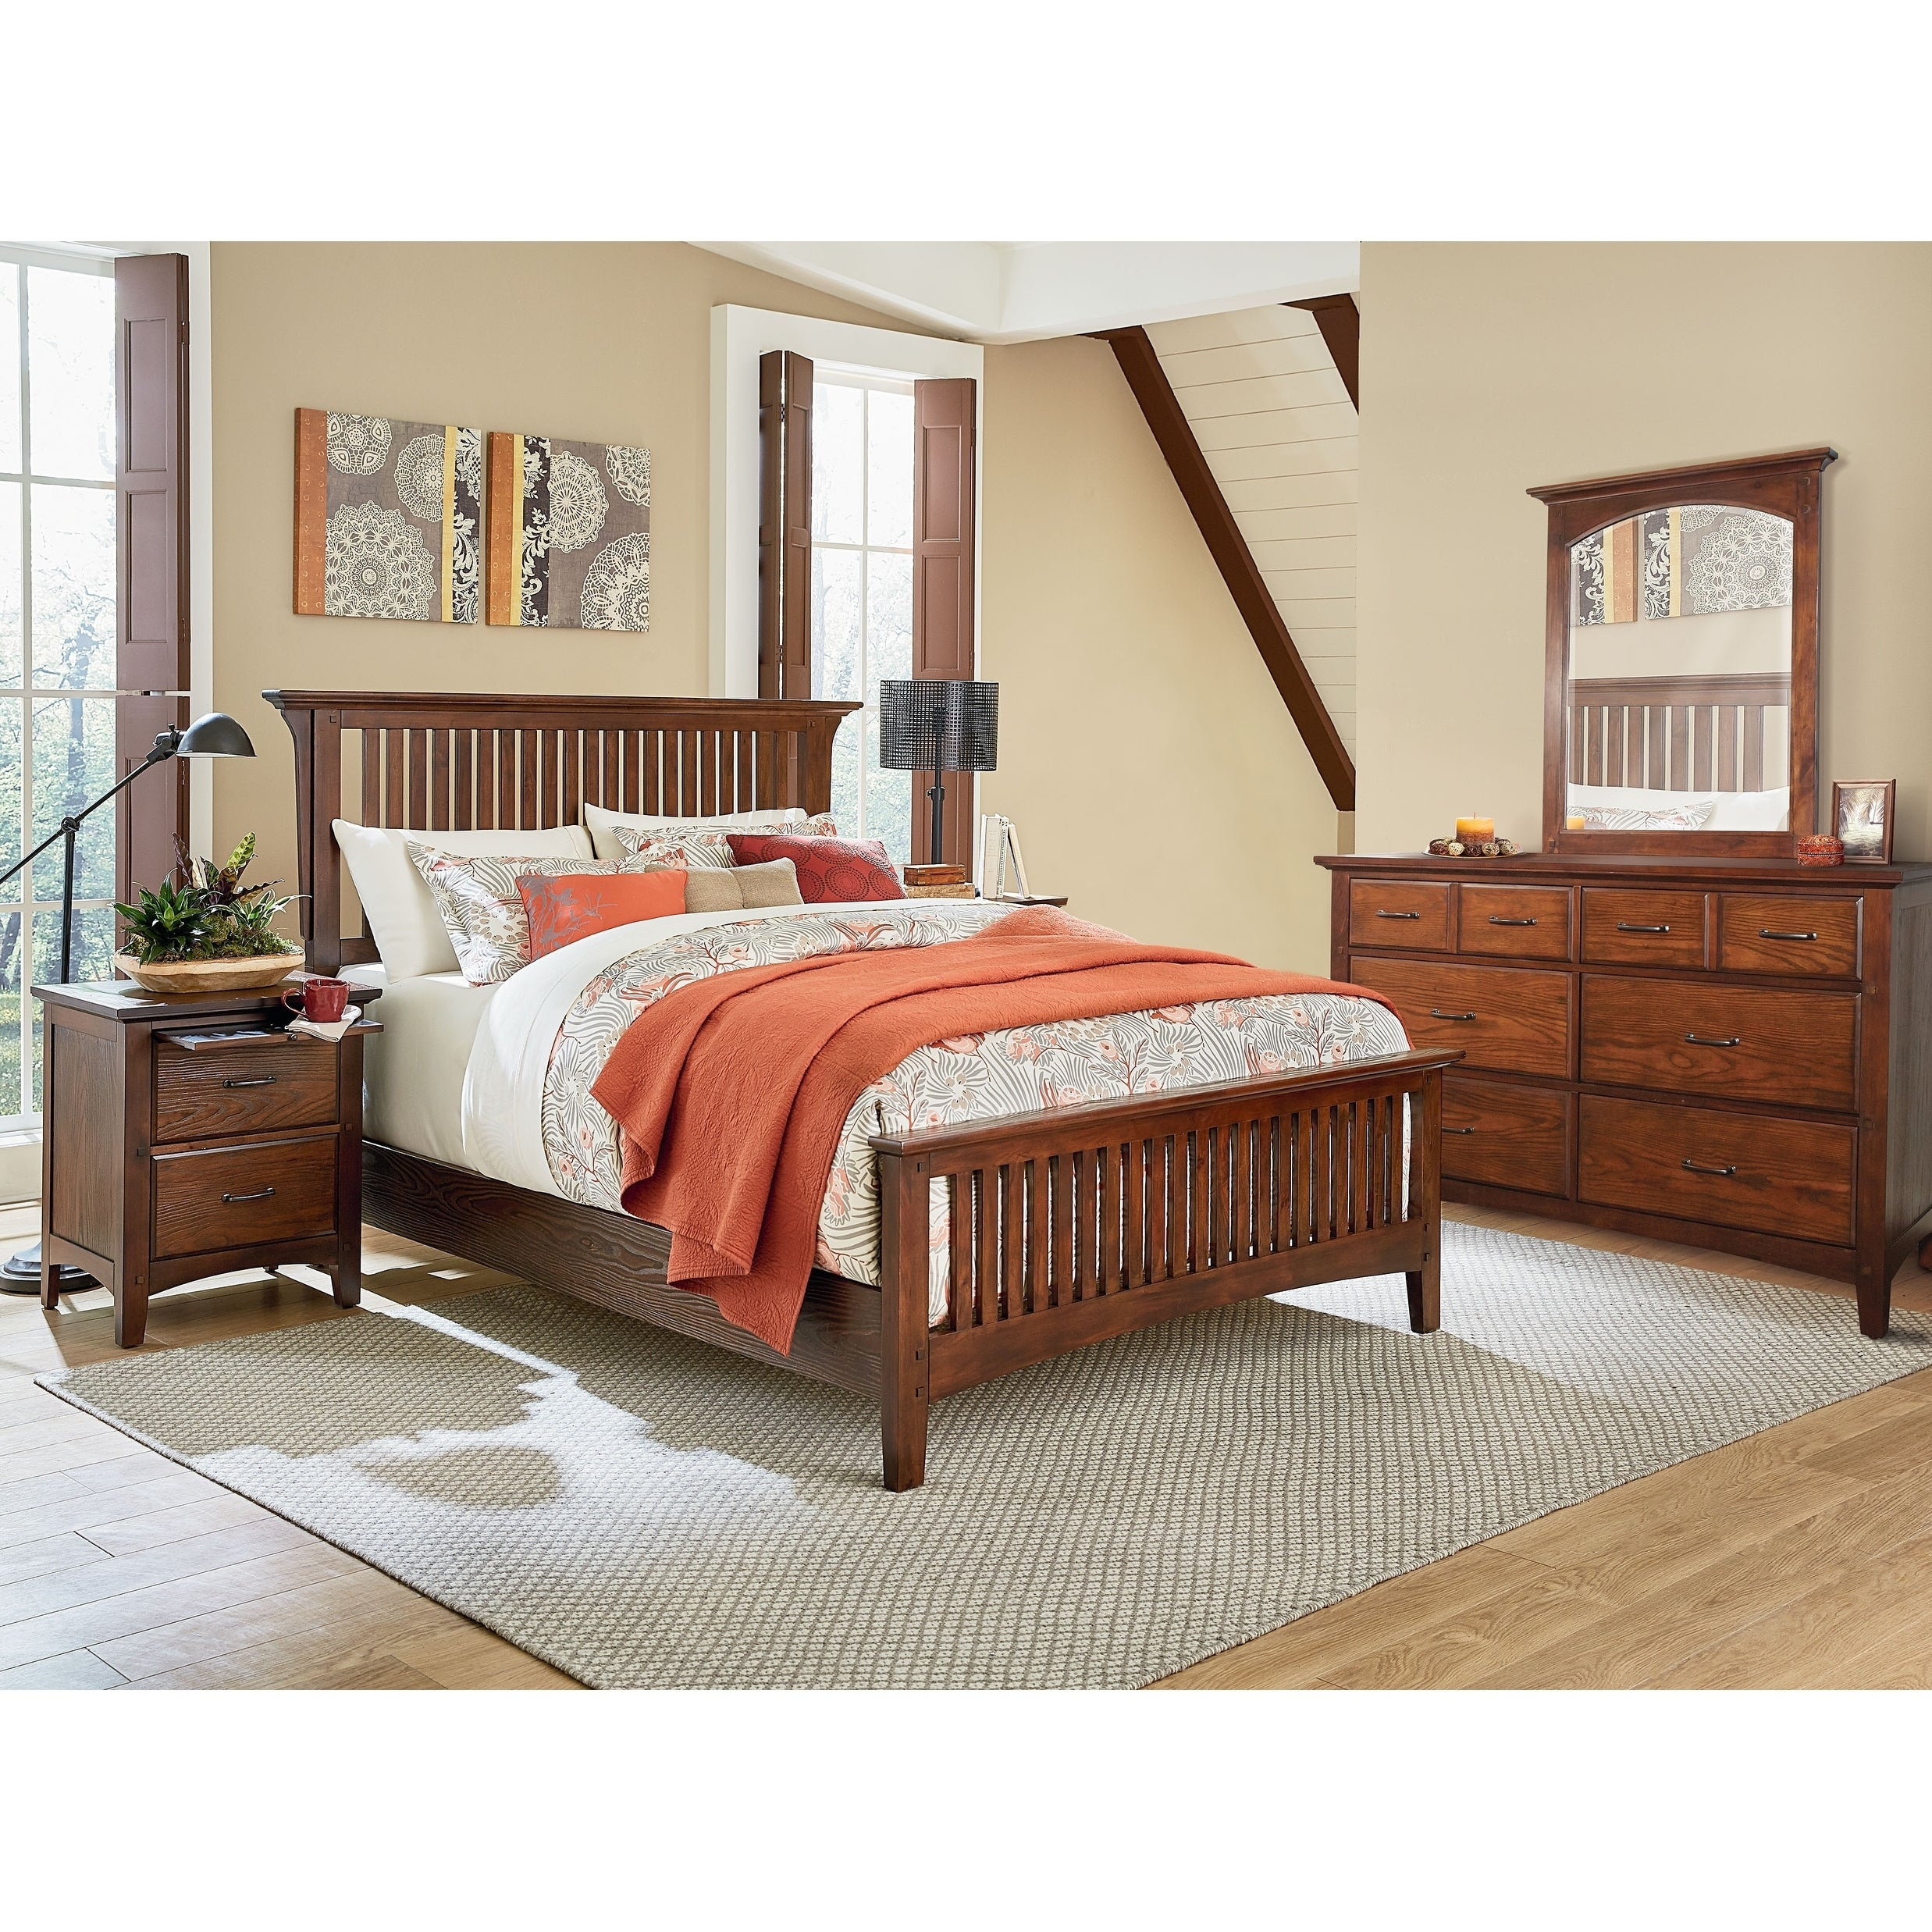 Osp Home Furnishings Modern Mission King Bedroom Set With 2 Nightstands And 1 Dresser With Mirror pertaining to measurements 2475 X 2475